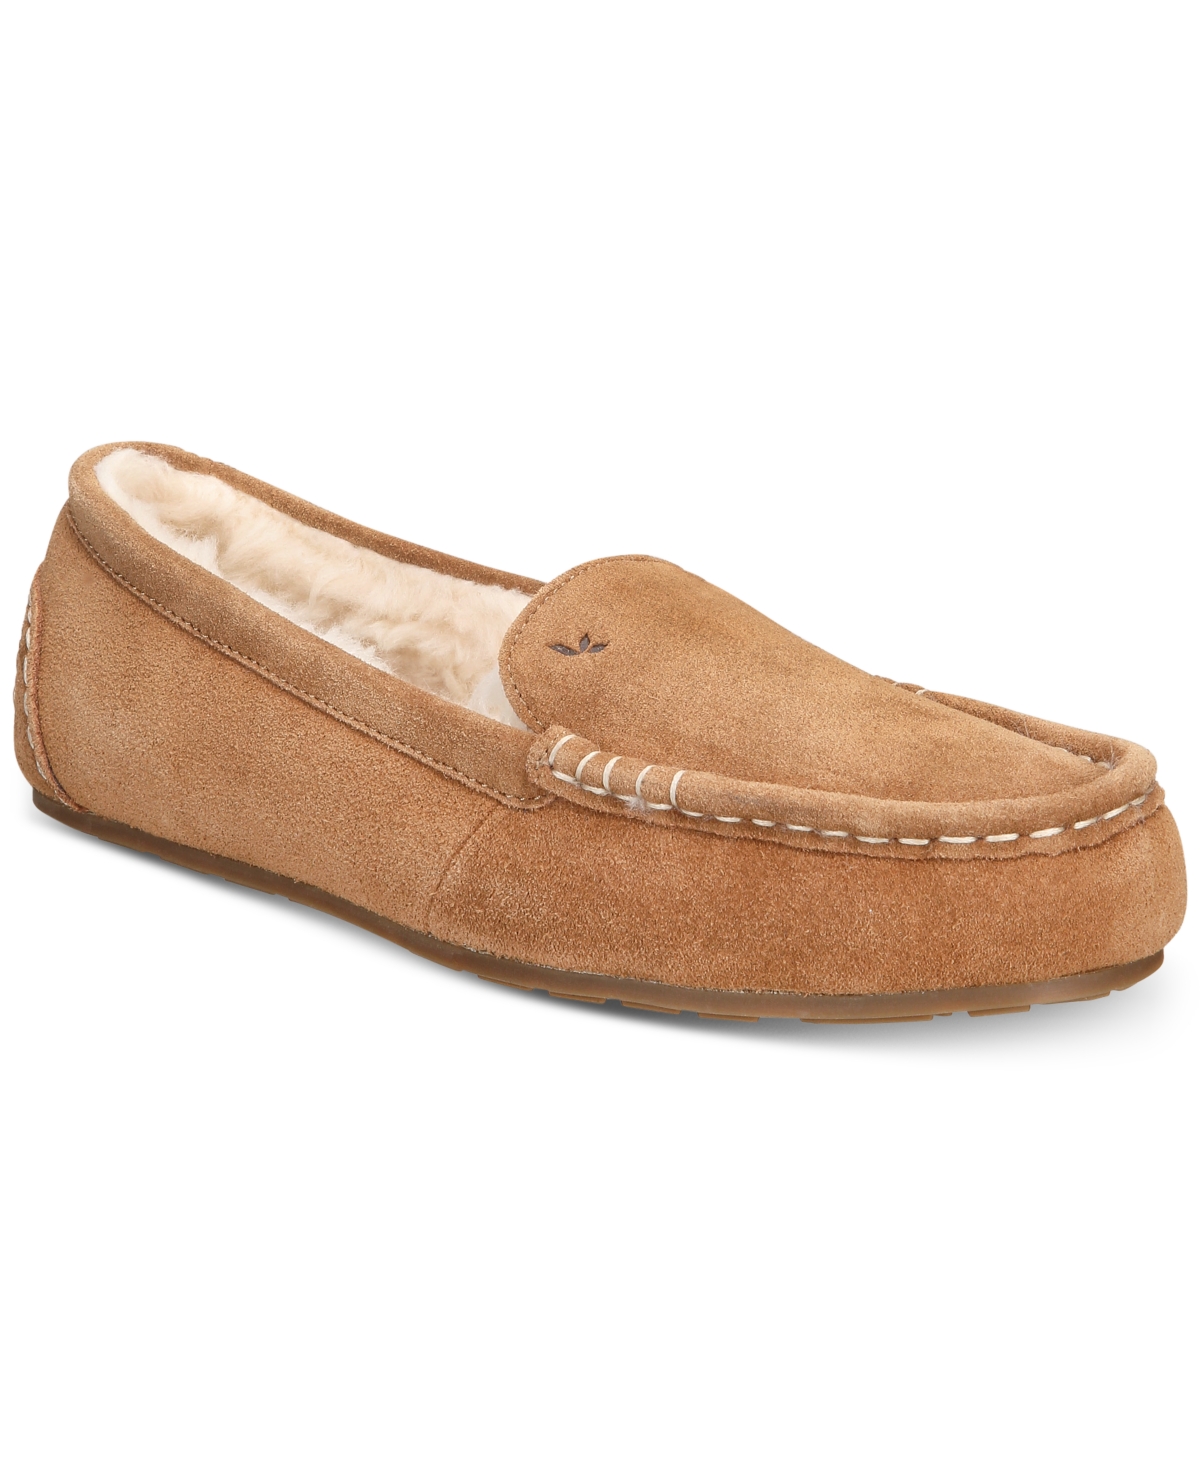 Koolaburra By Ugg Women's Lezly Slippers Women's Shoes